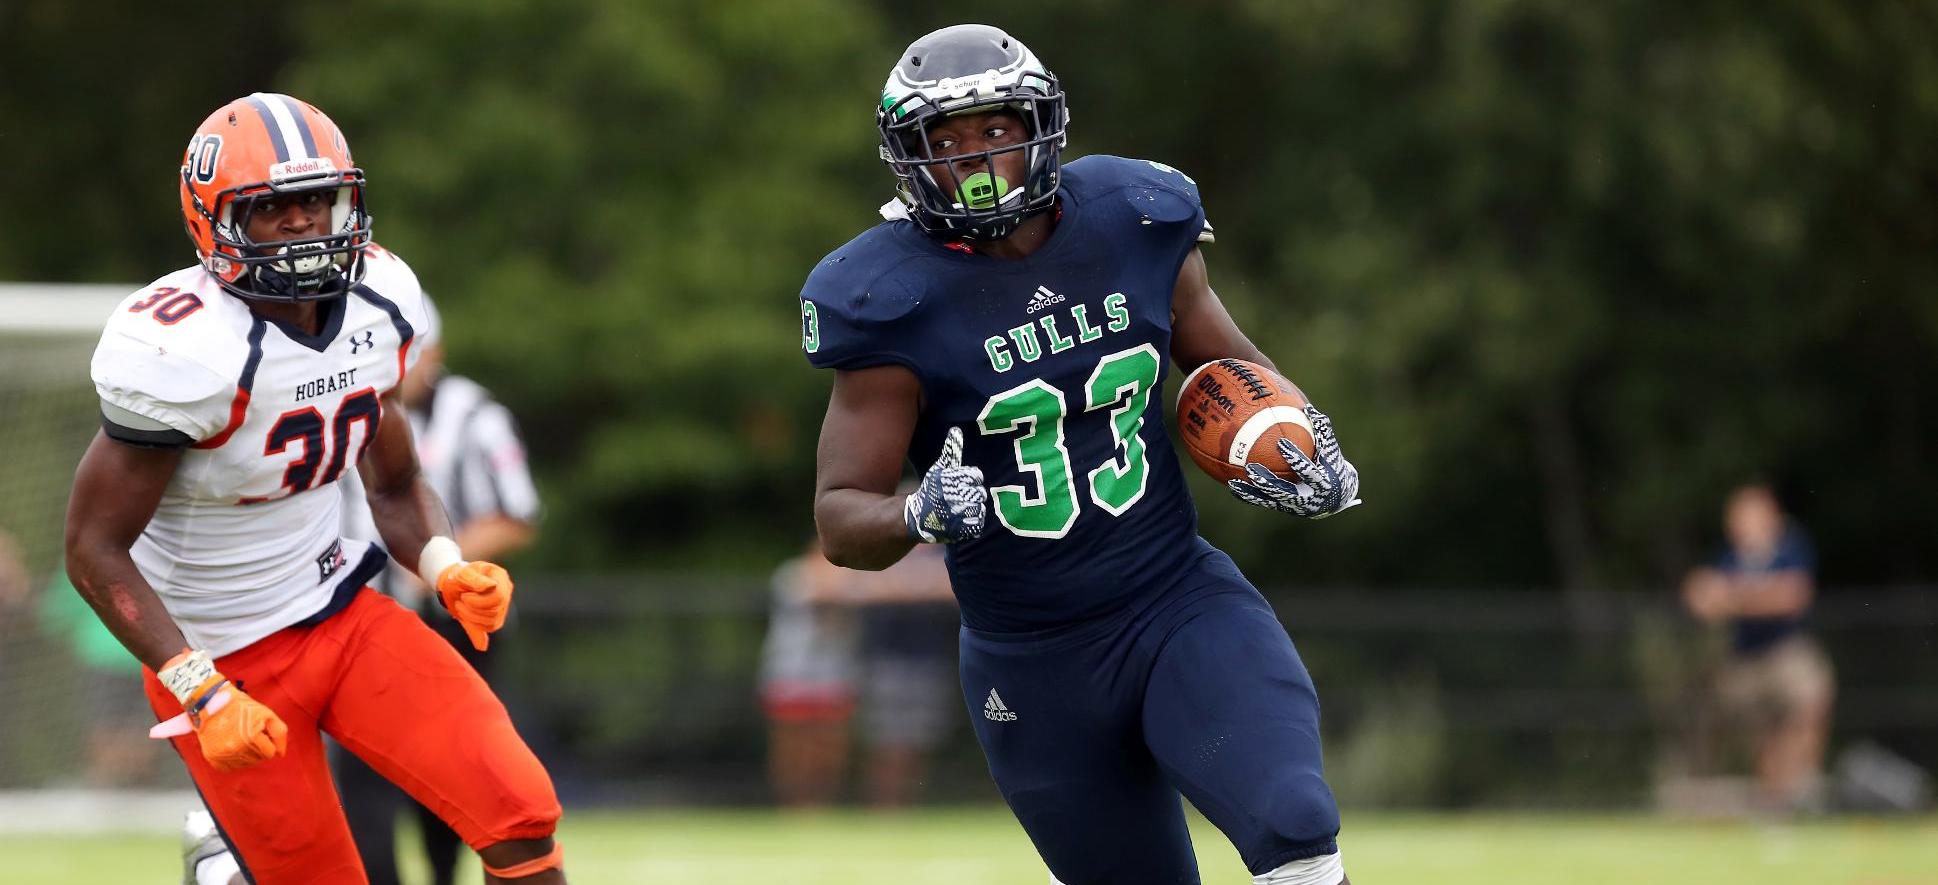 Endicott Takes Down Nichols 37-0 On Homecoming For First NEFC Win